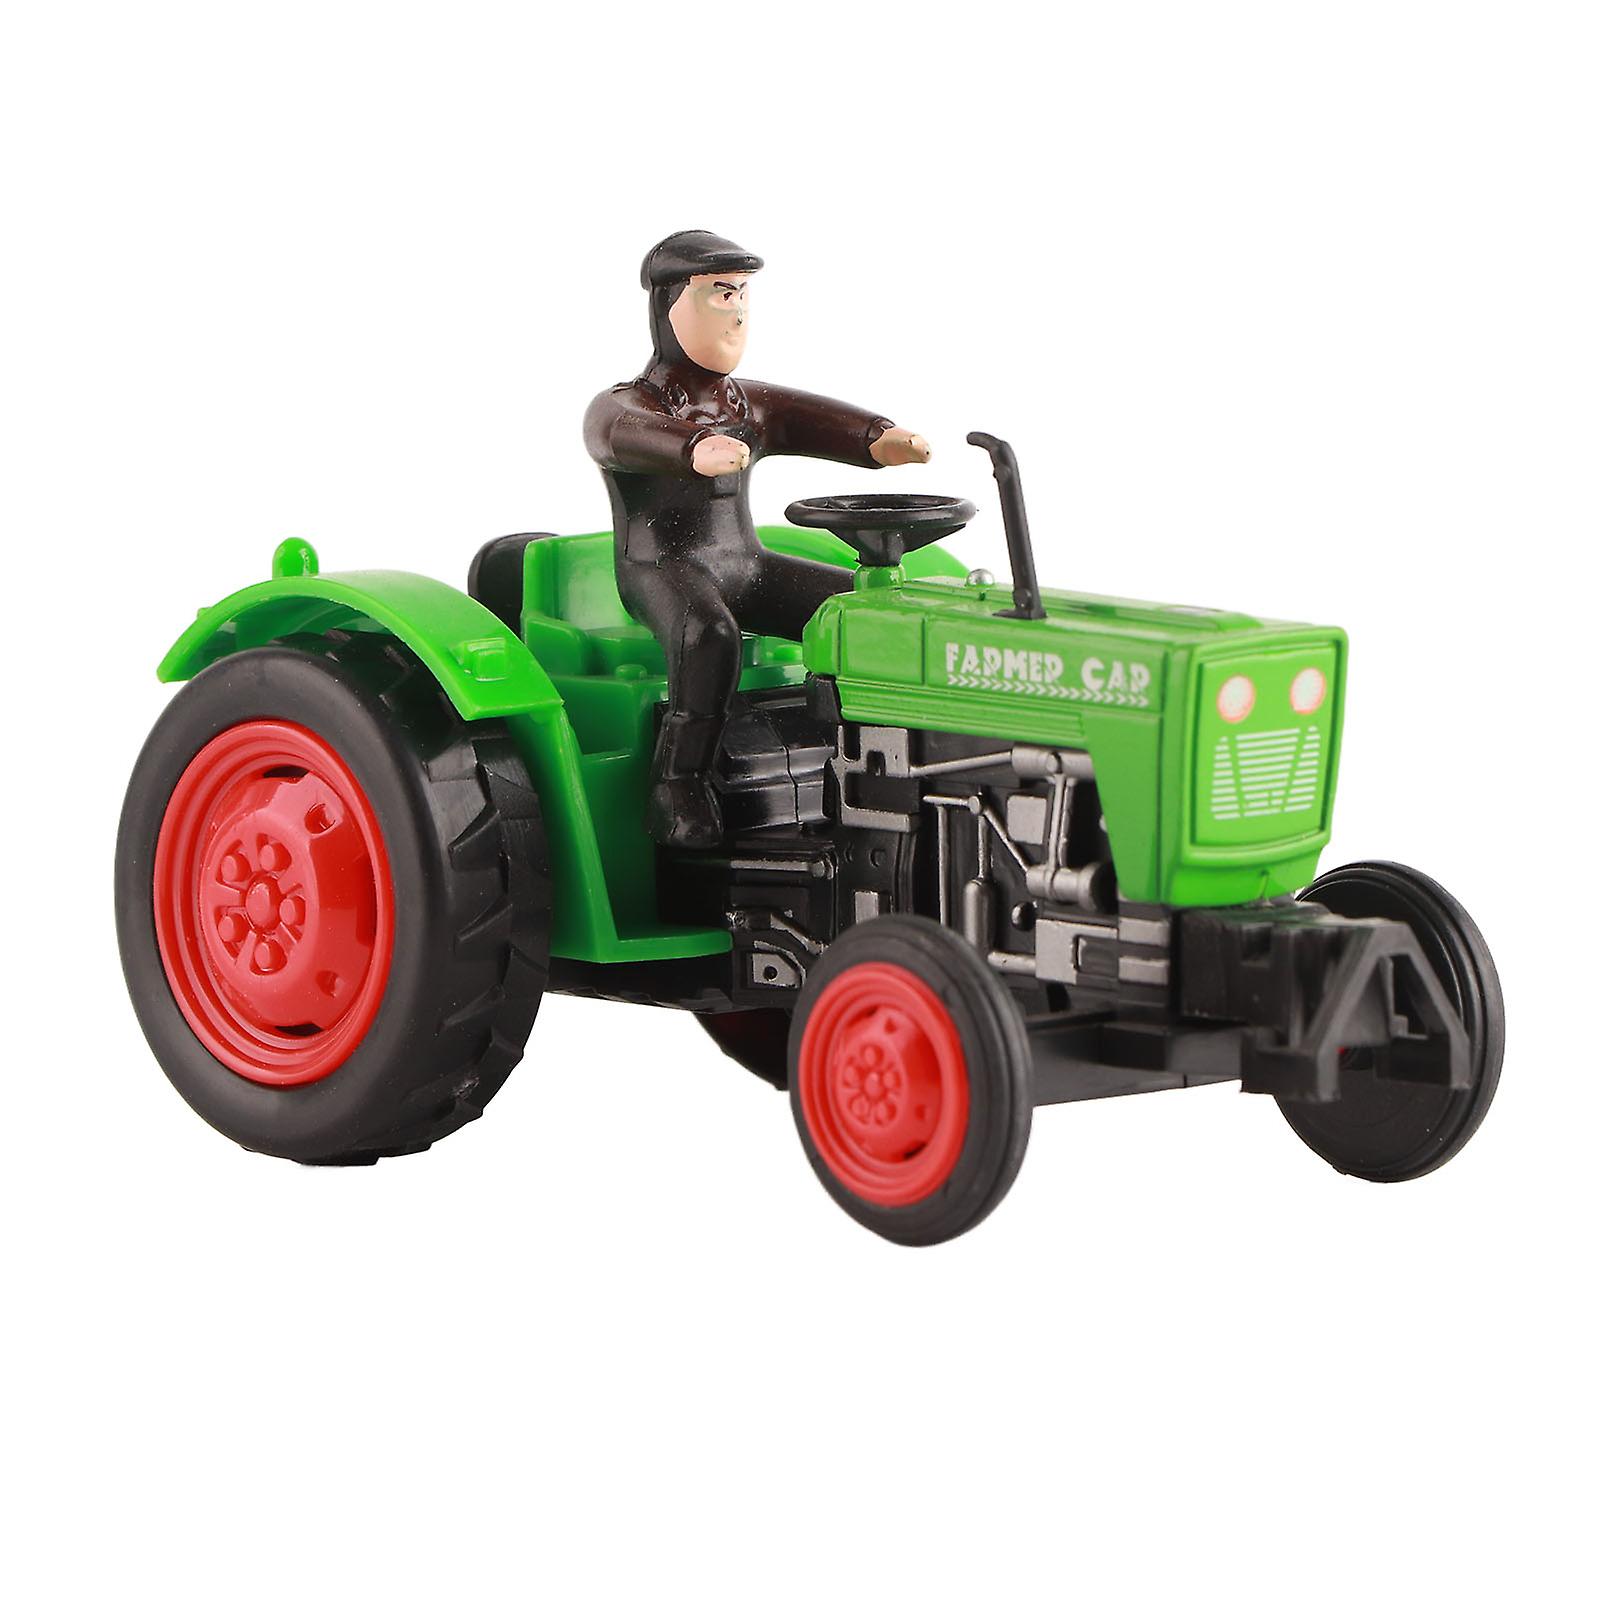 Simulation Tractor Vehicle Model Sturdy Alloy Engineering Farmer Car Toy For Childrengreen